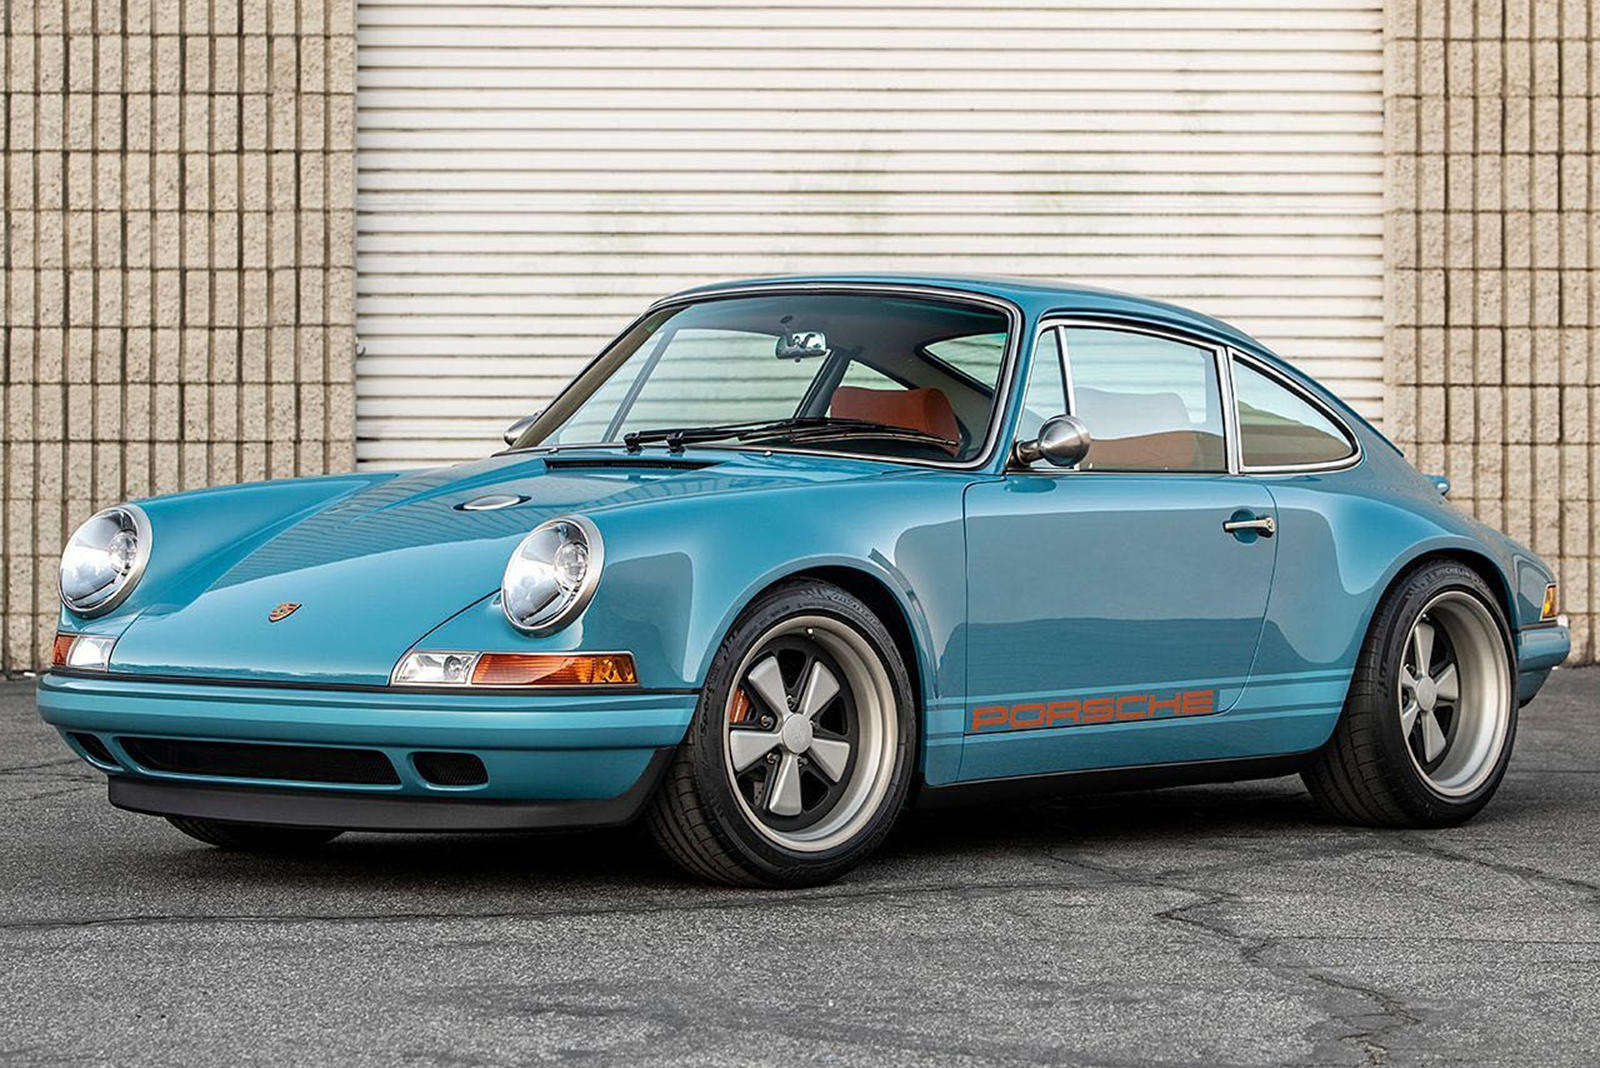 photo of Singer Delivers Another Gorgeous Porsche 911 image